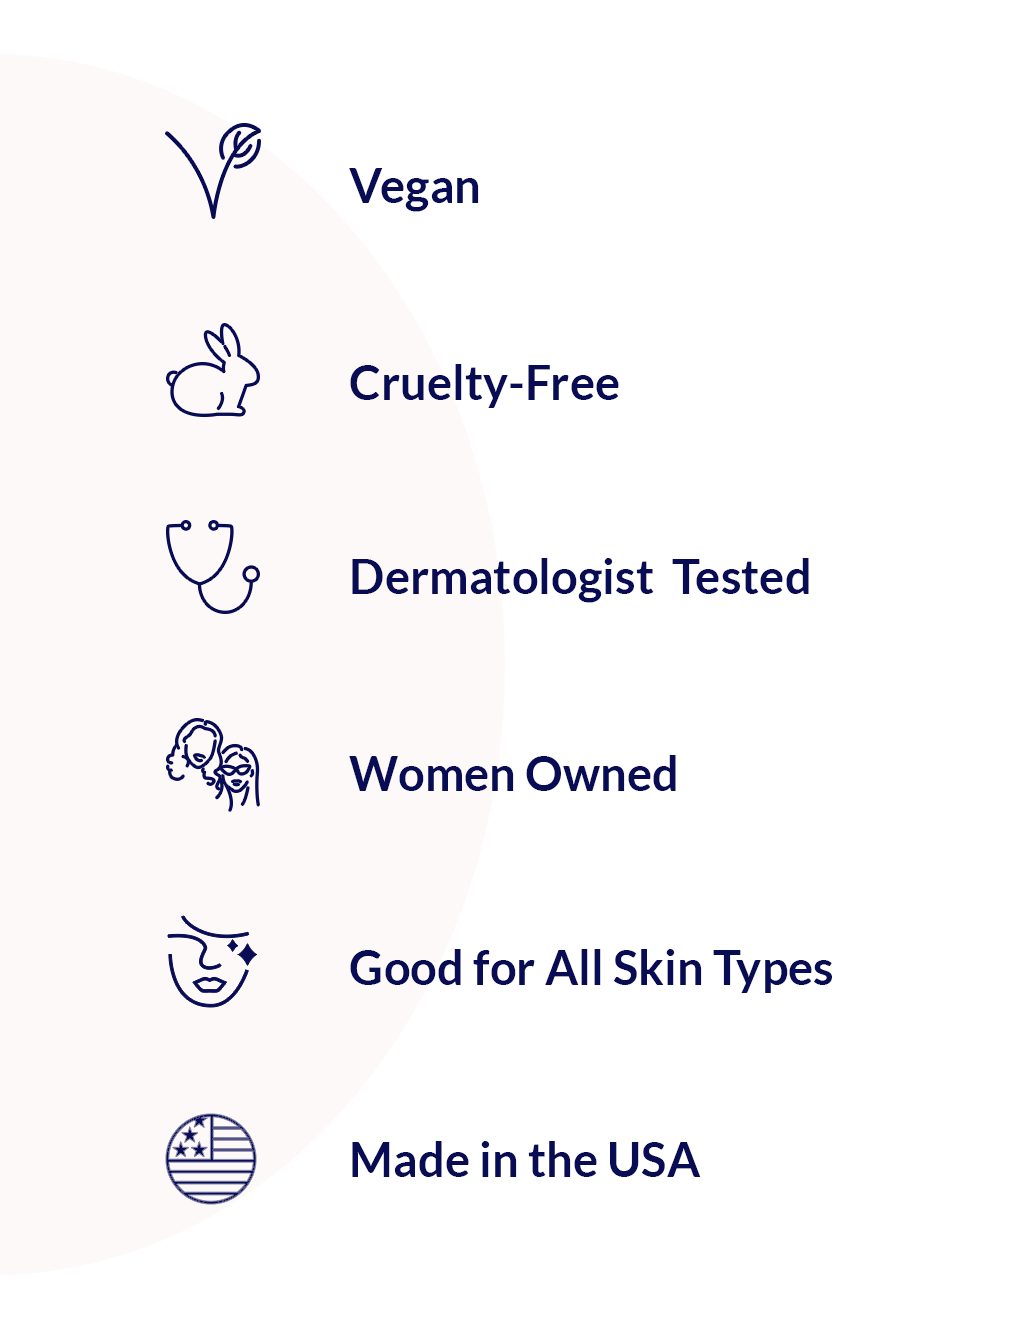 Vegan Cruelty-Free, Dermatologist Tested, Women Owned, Good for all skin types, Made in the USA